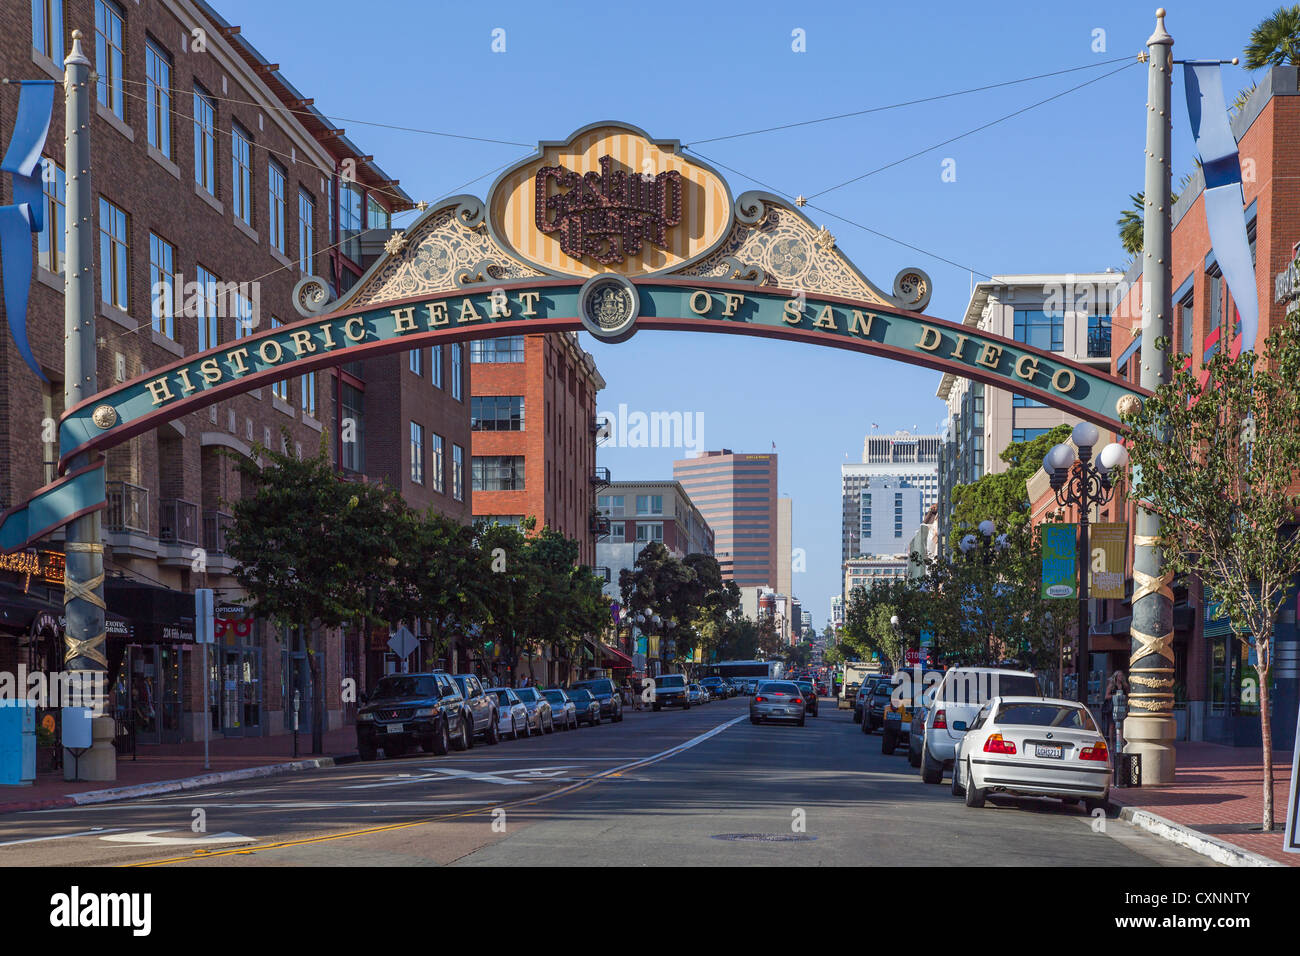 Buildings in the Gaslamp Quarter Historic District, San Diego CA. Stock Photo